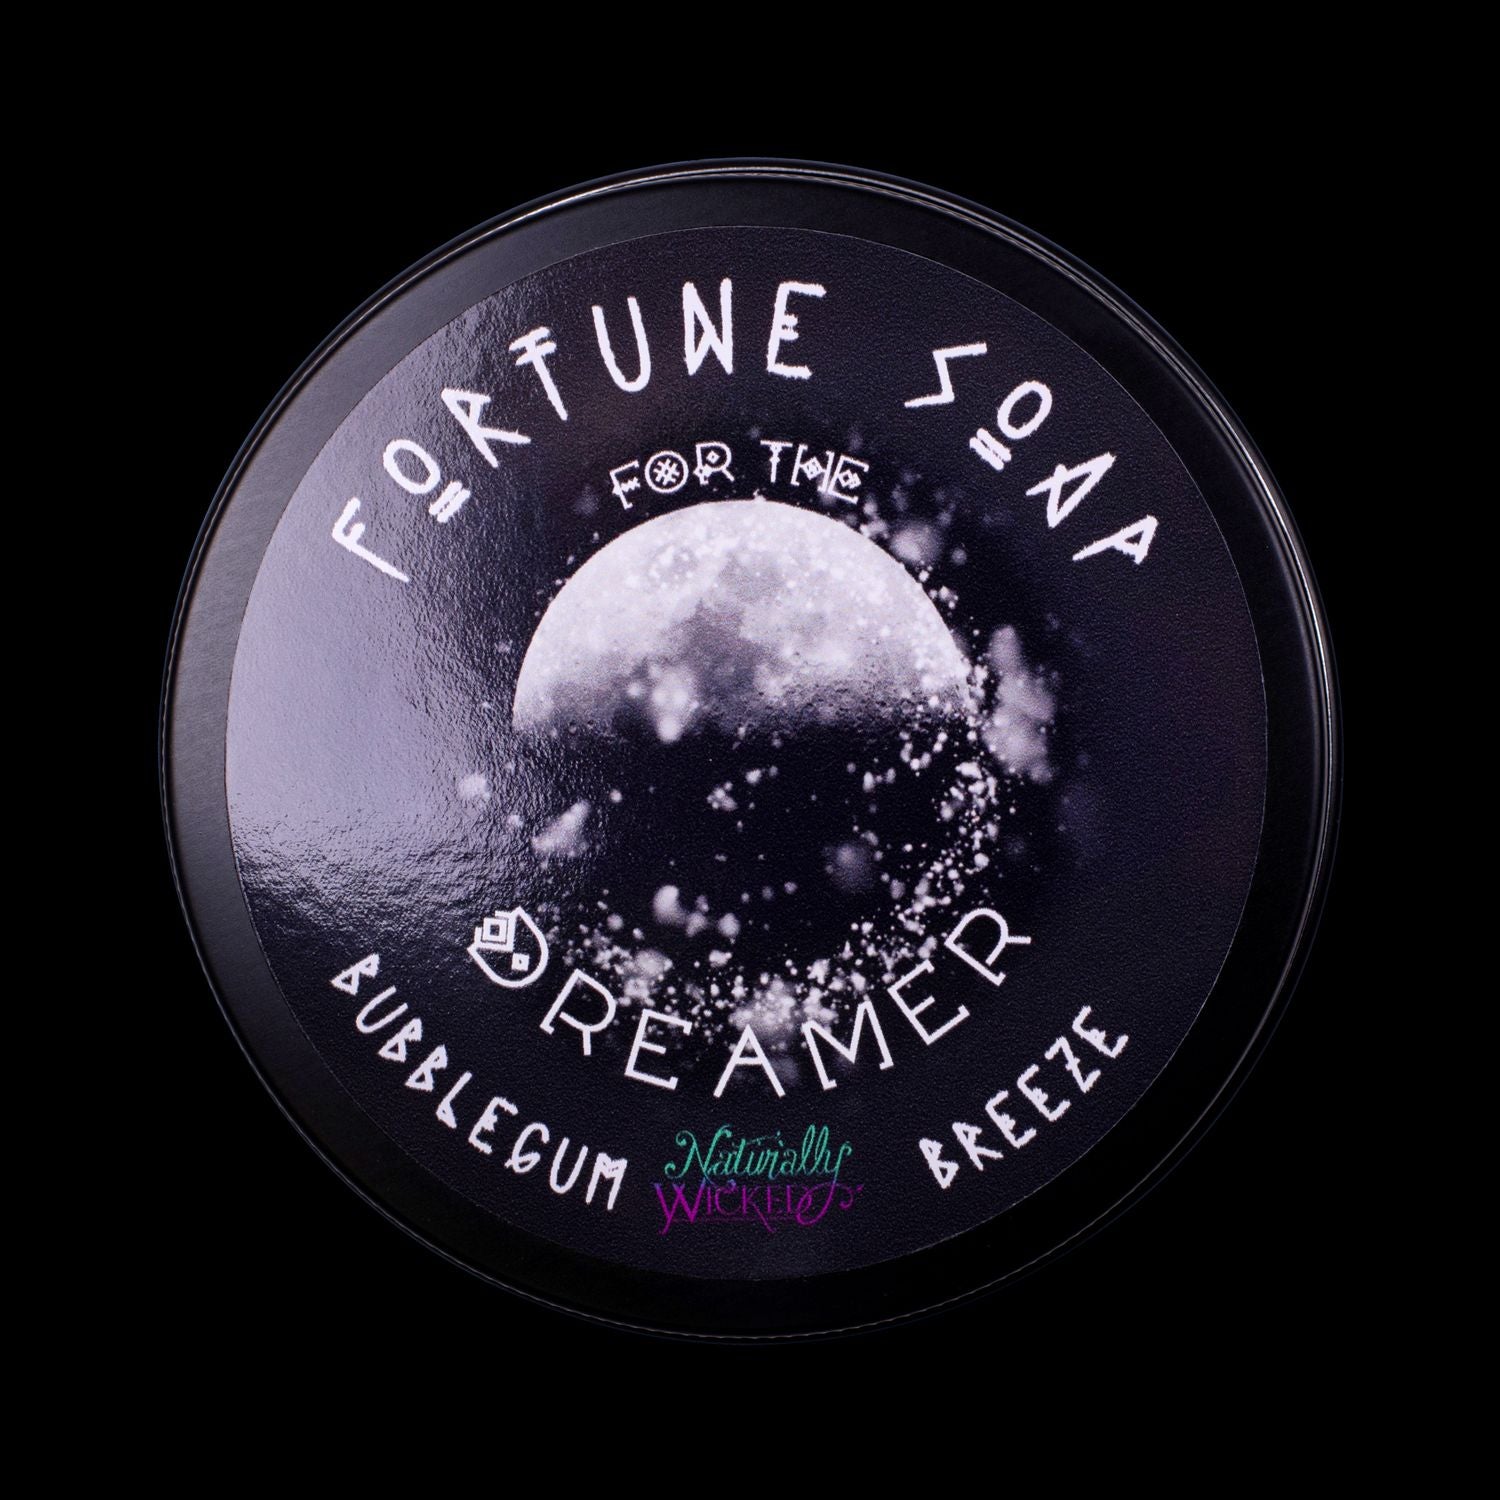 Naturally Wicked Fortune Soap For The Dreamer. Black Plant-based Soap With Black Obsidian Rune Crystal, Scented With Bubblegum Breeze All Situated In A Black Glossy Gift Tin.